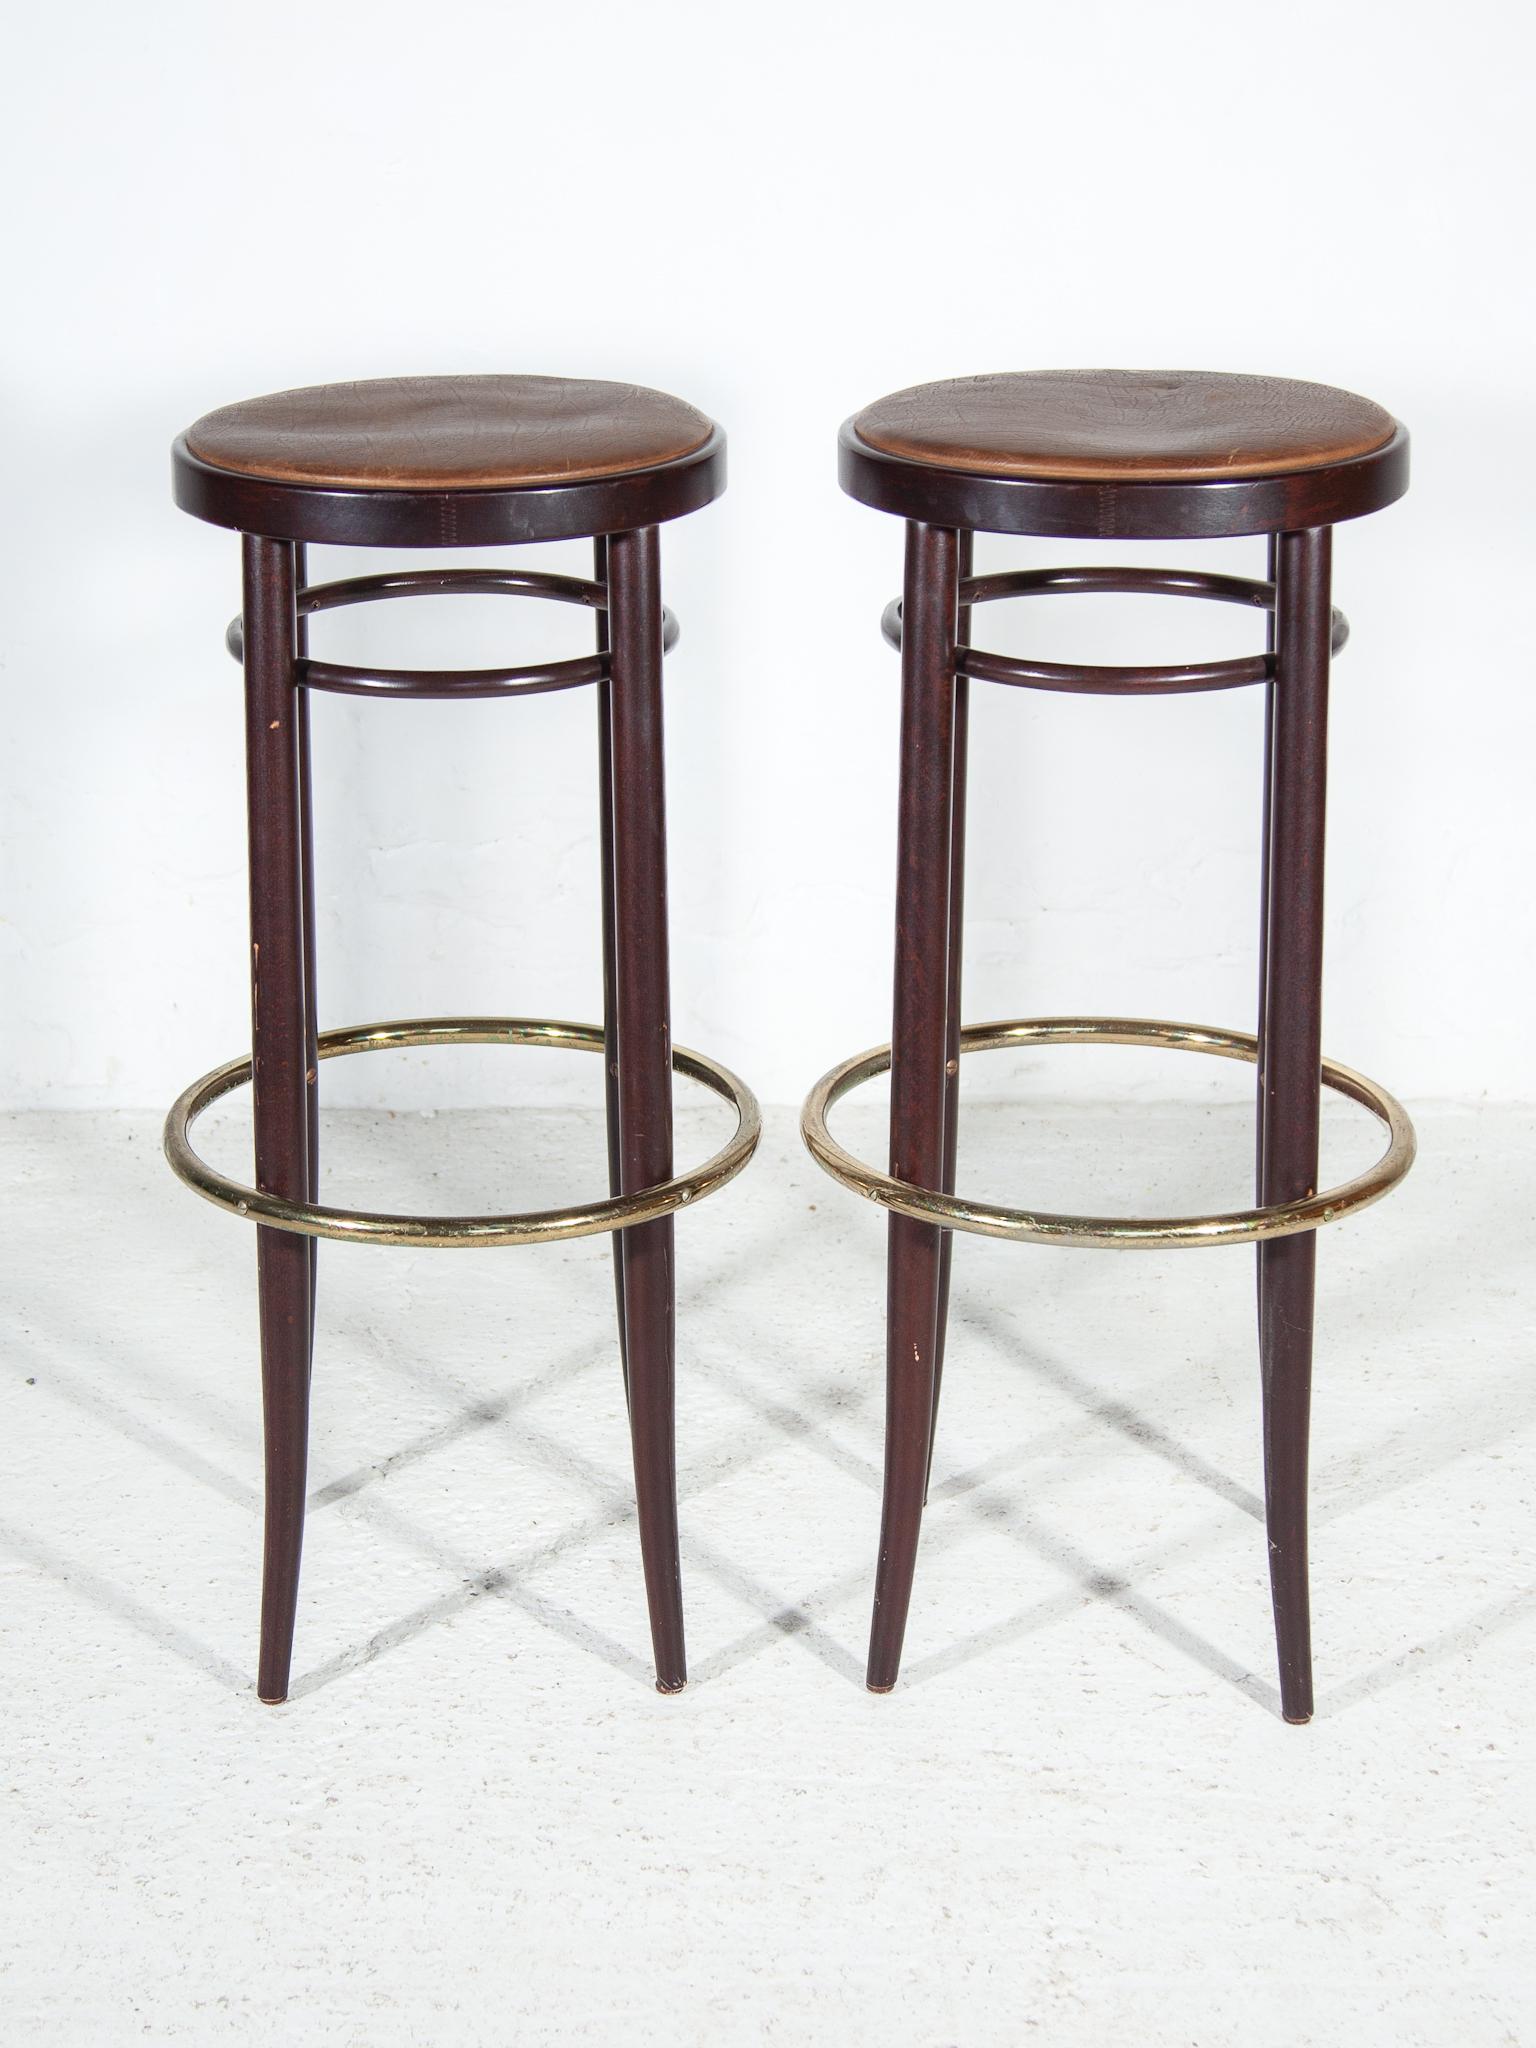 Hand-Crafted Thonet Bar Stools, 1970s set of Two, Austria For Sale